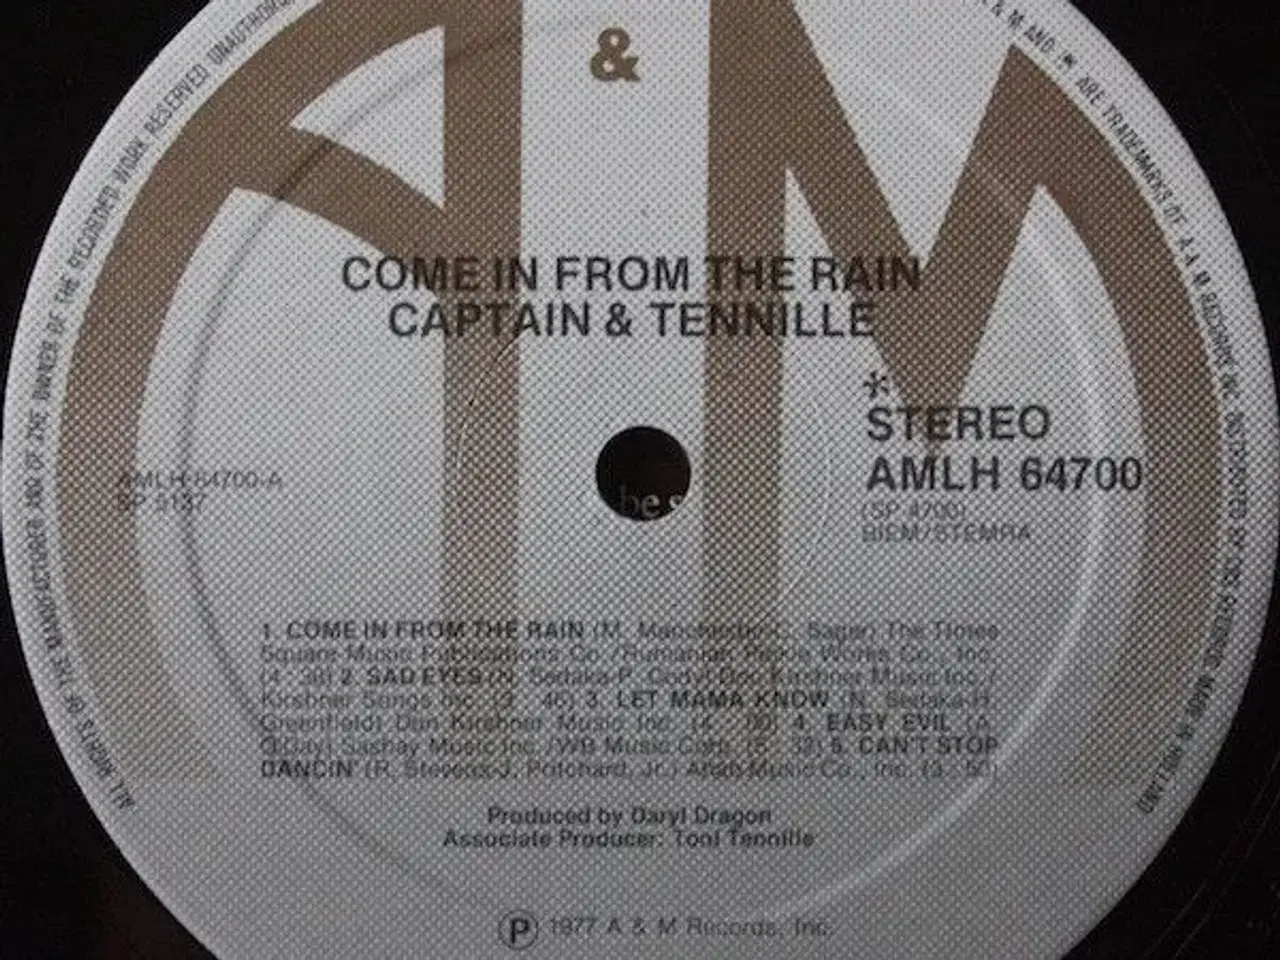 Billede 3 - Captain & Tennille - Come In From The Ra